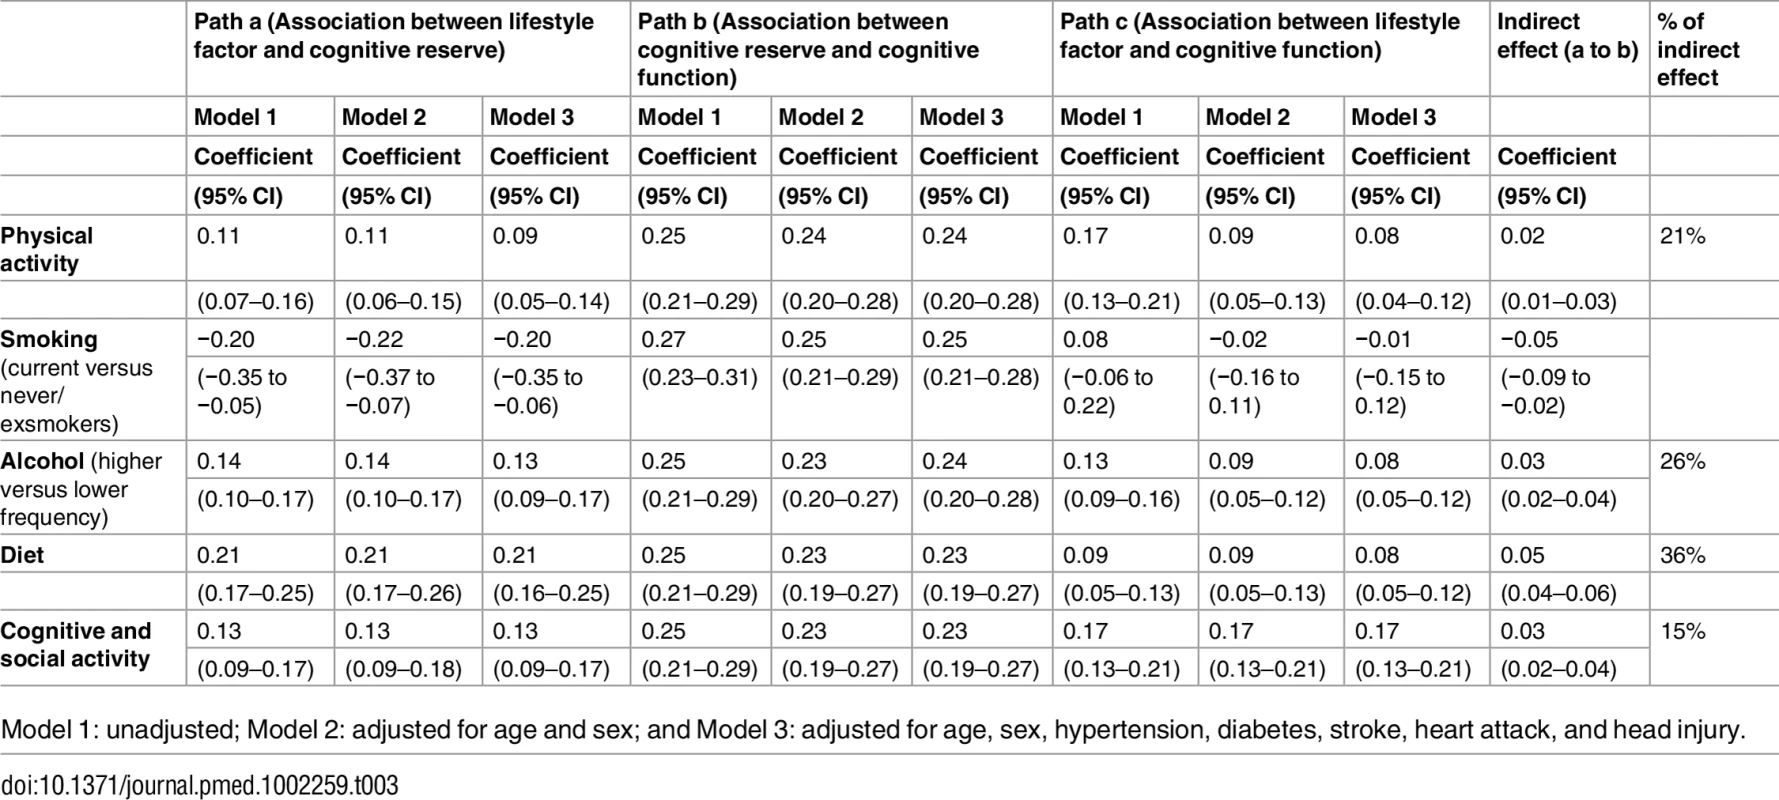 Mediation analysis of the effects of cognitive reserve on the association of lifestyle factors with cognitive function.